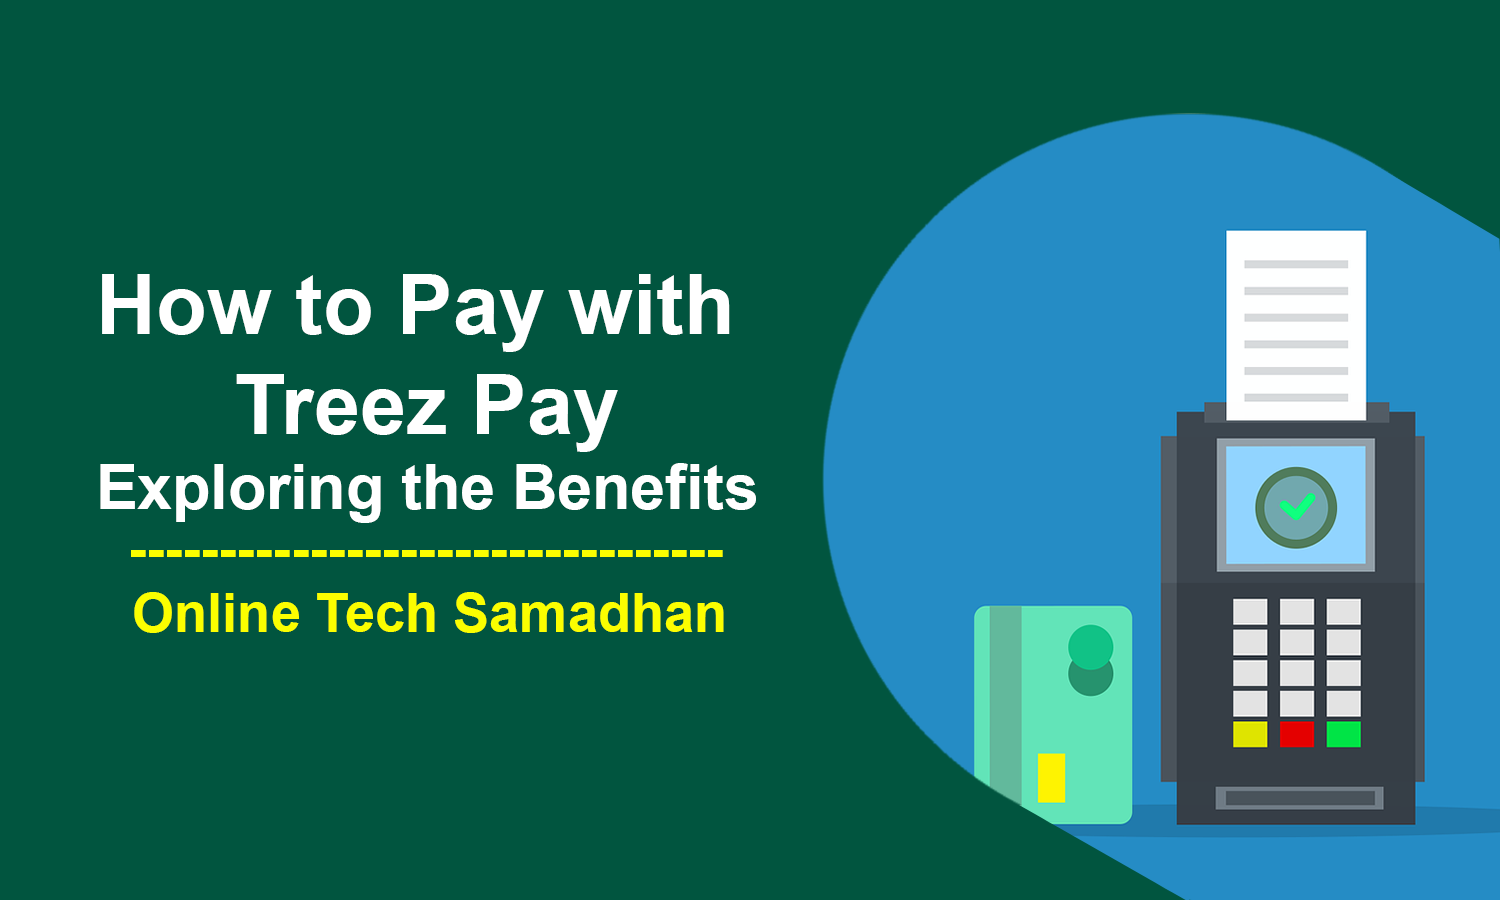 How to Pay with Treez Pay